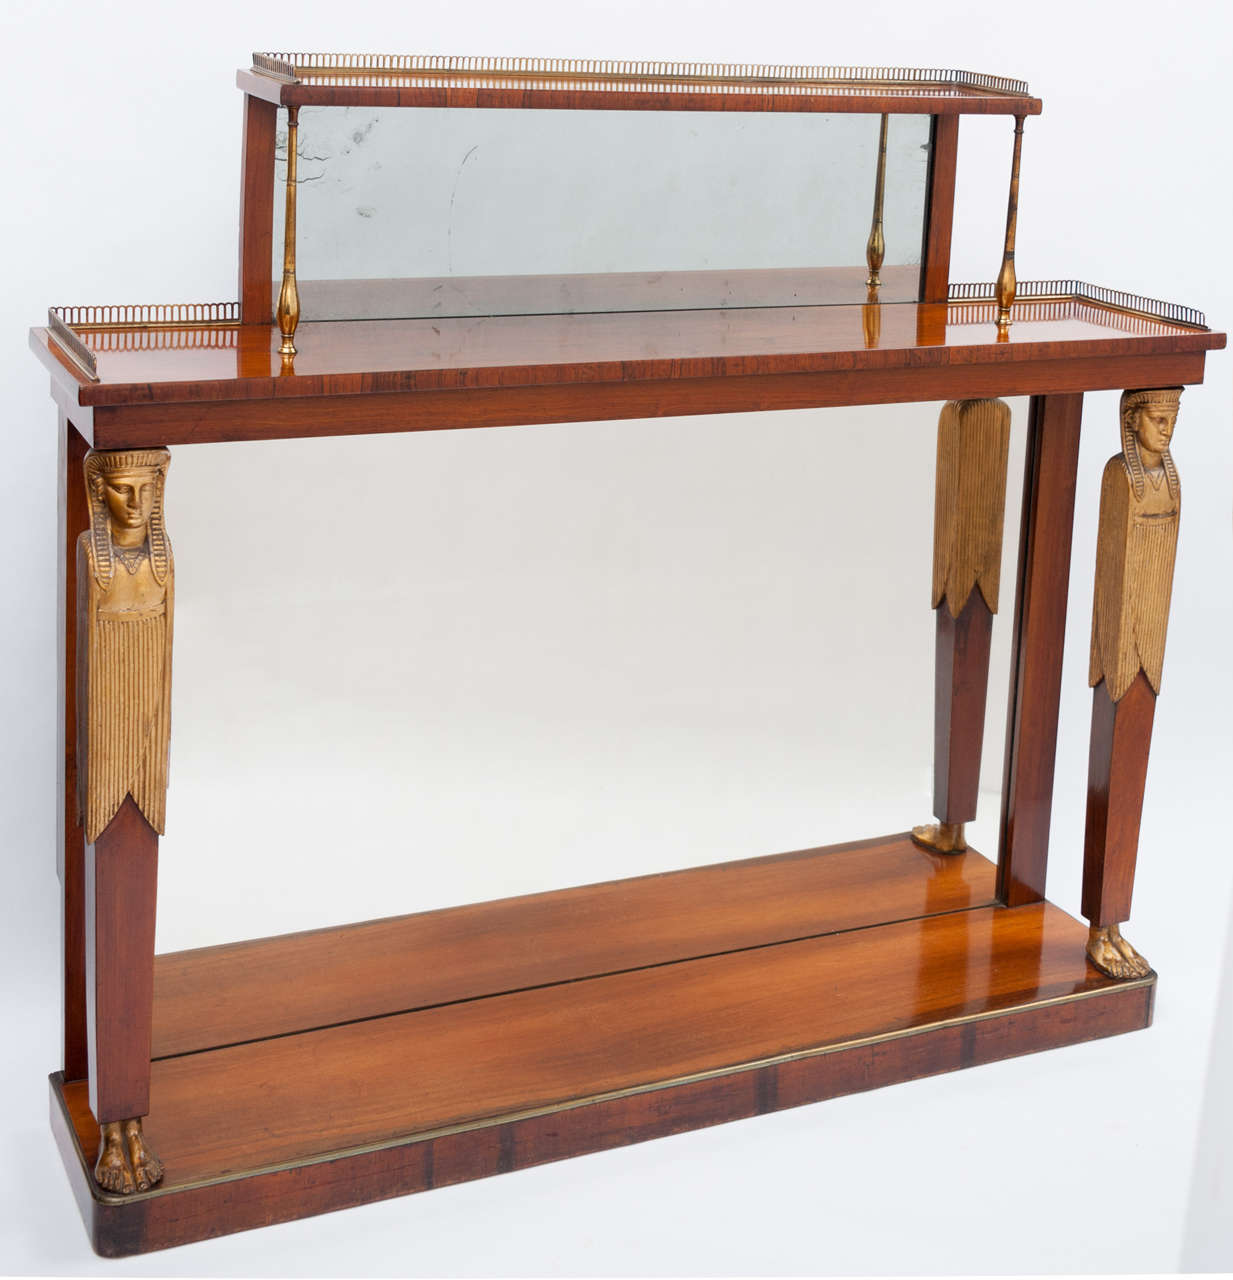 A good Regency rosewood and gilt console table, the rectangular super structure with a mirror back and pierced brass gallery, supported on gilded brass columns. The top also with brass gallery, supported on tapering pilasters with carved gilt wood